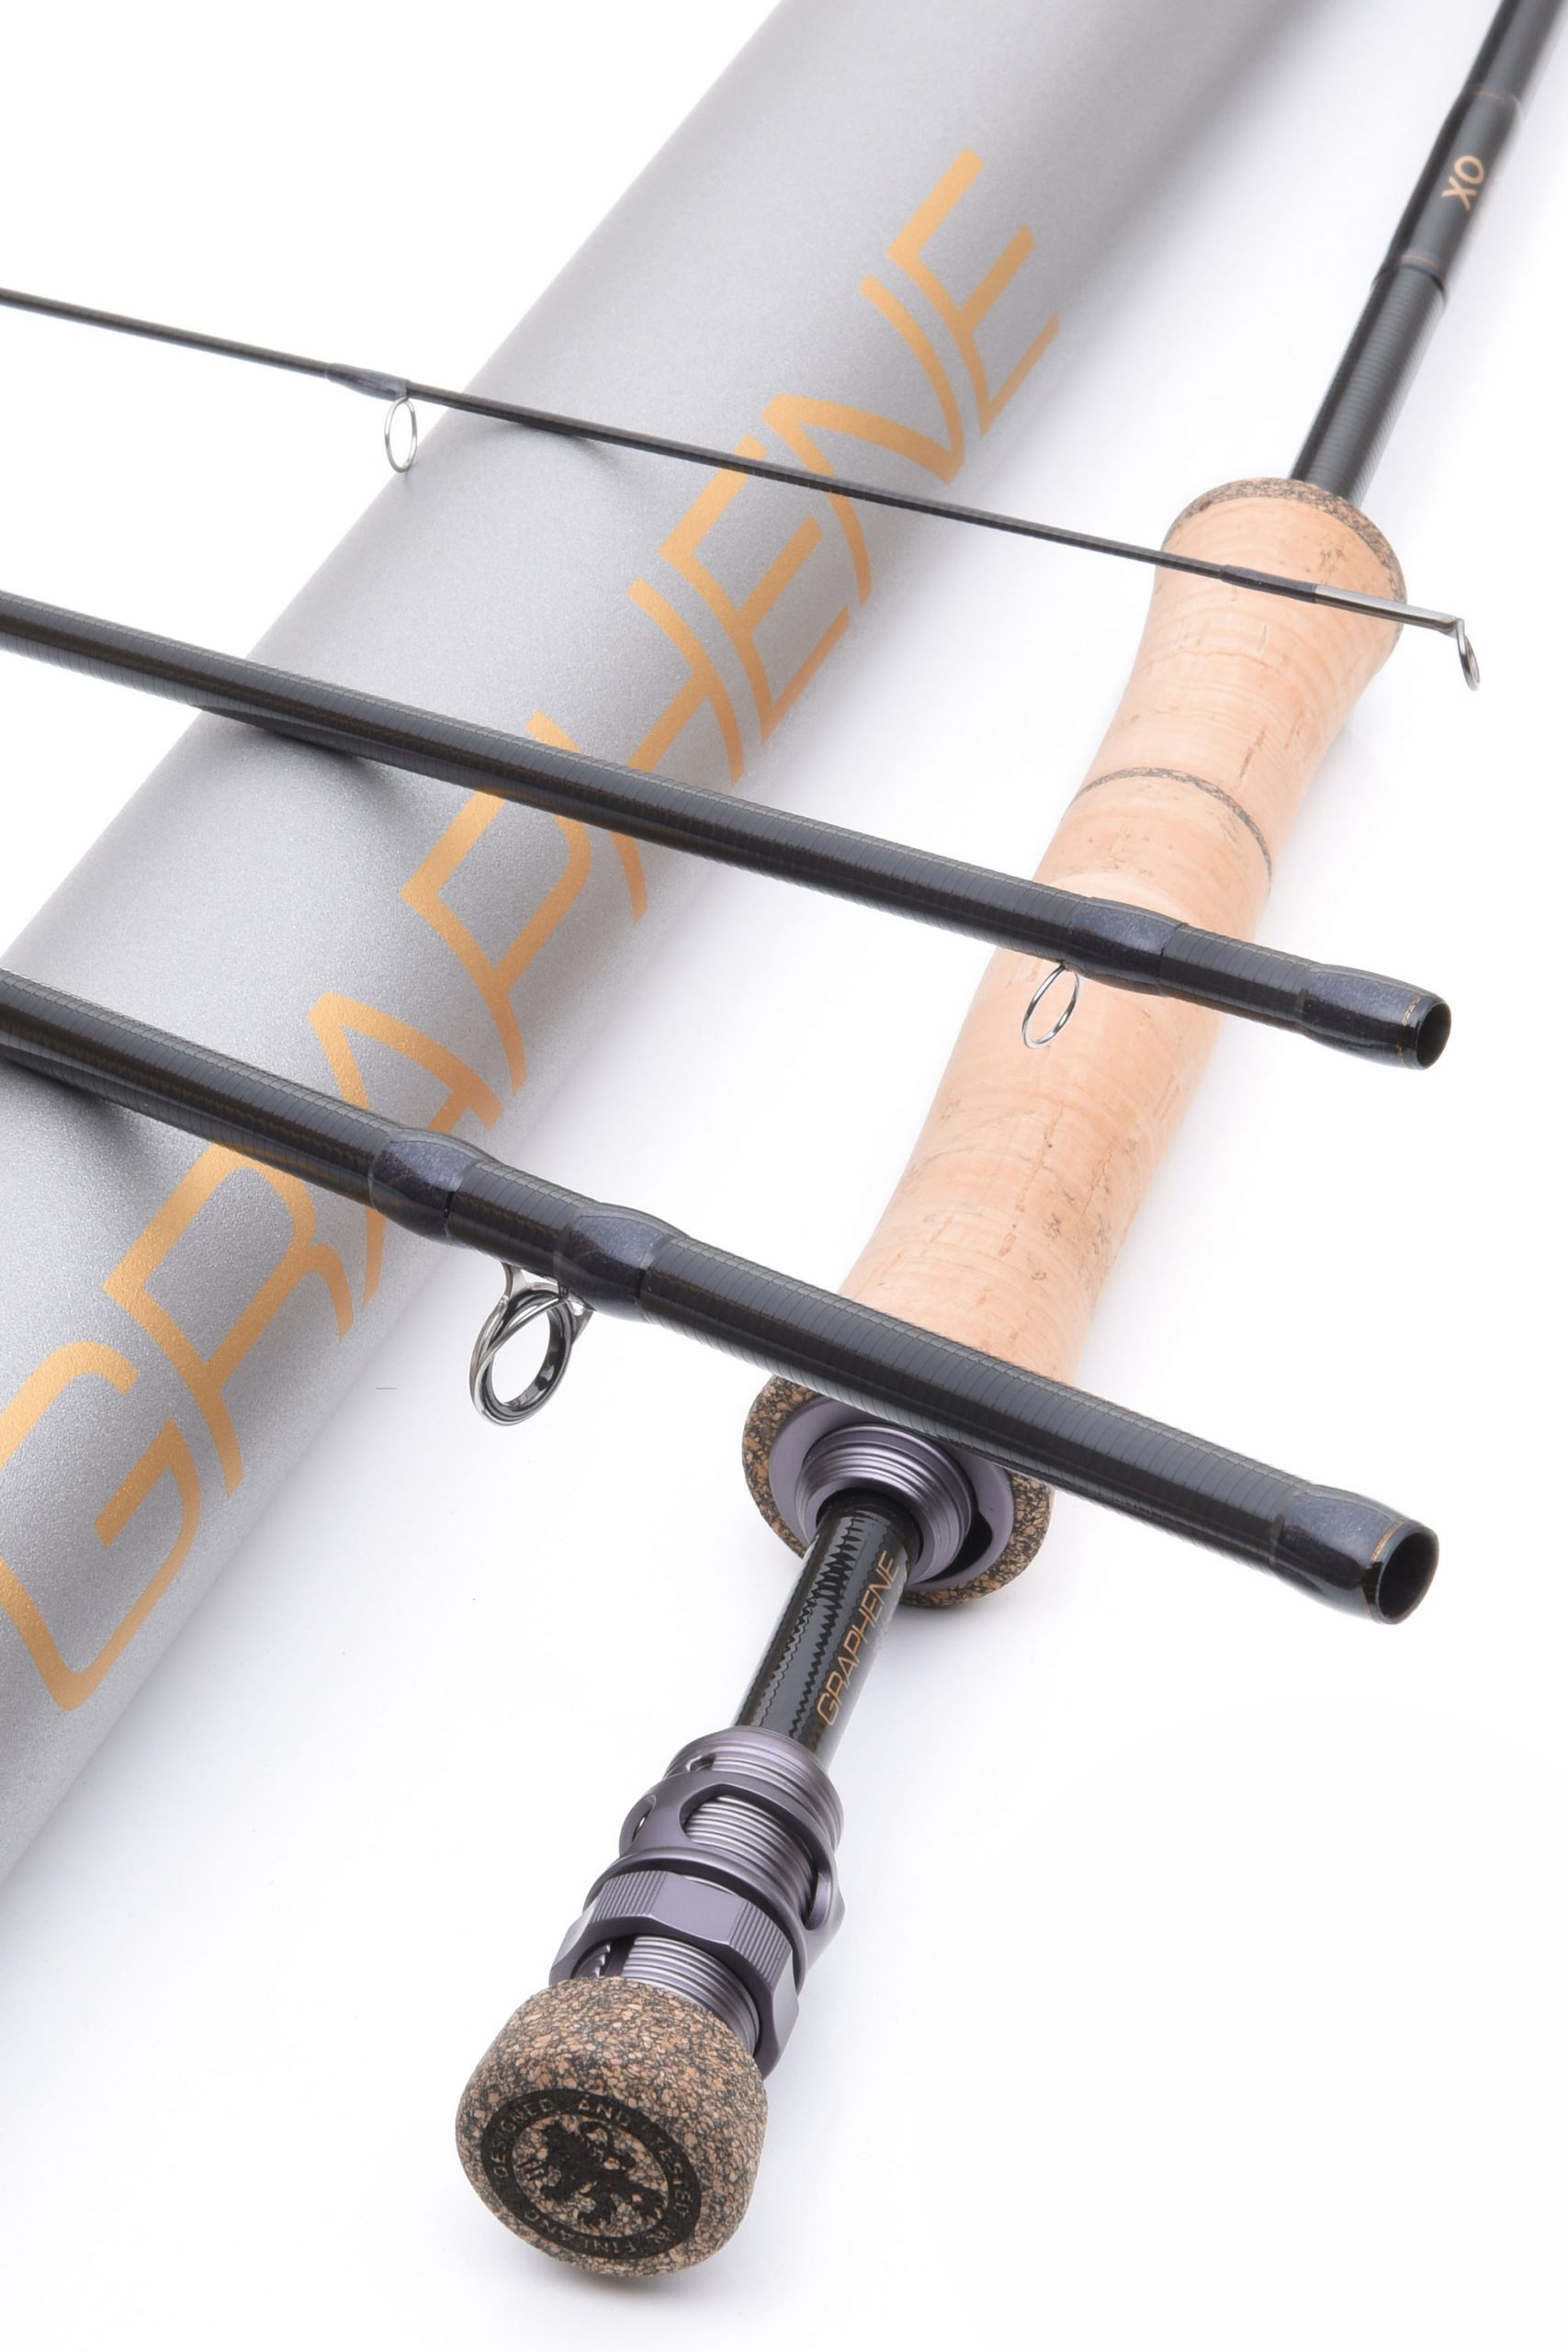 Vision Xo Graphene Fly Rod 9 Foot 3 #6 For Fly Fishing